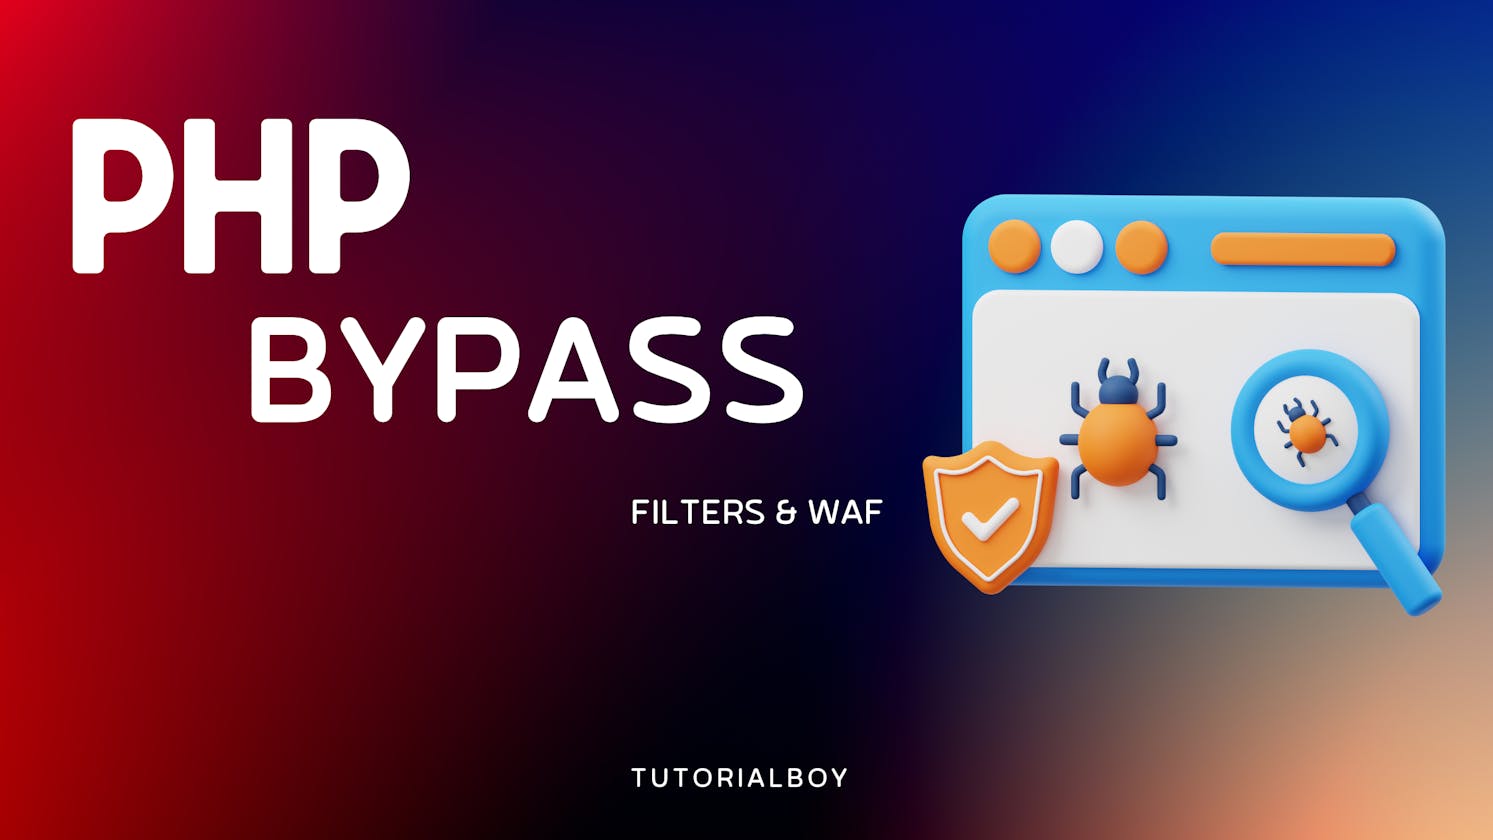 How To Exploit PHP Remotely To Bypass Filters & WAF Rules